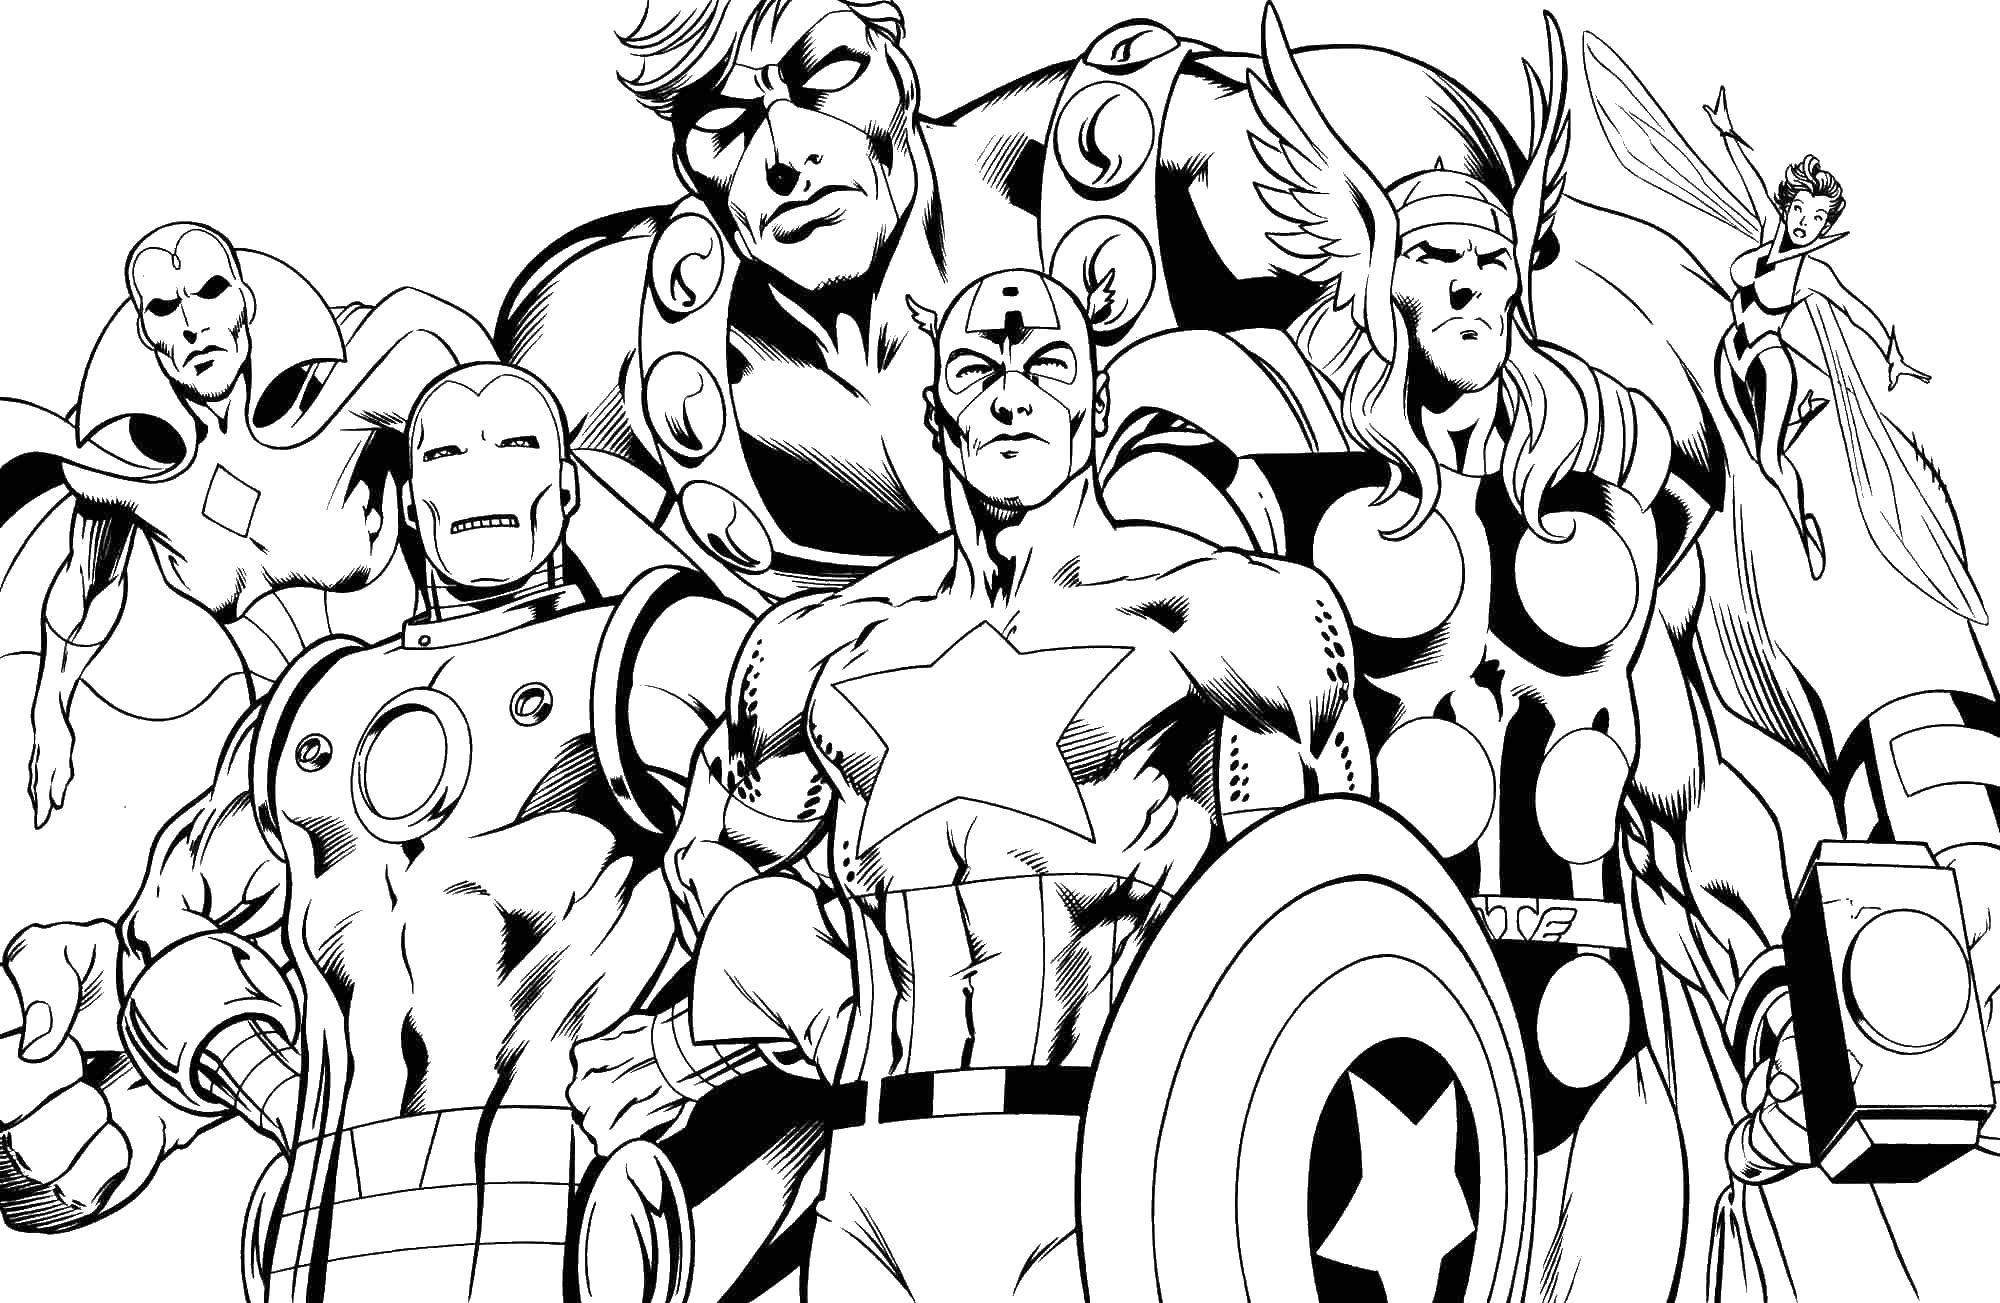 Drawing 17 of Avengers to print and color